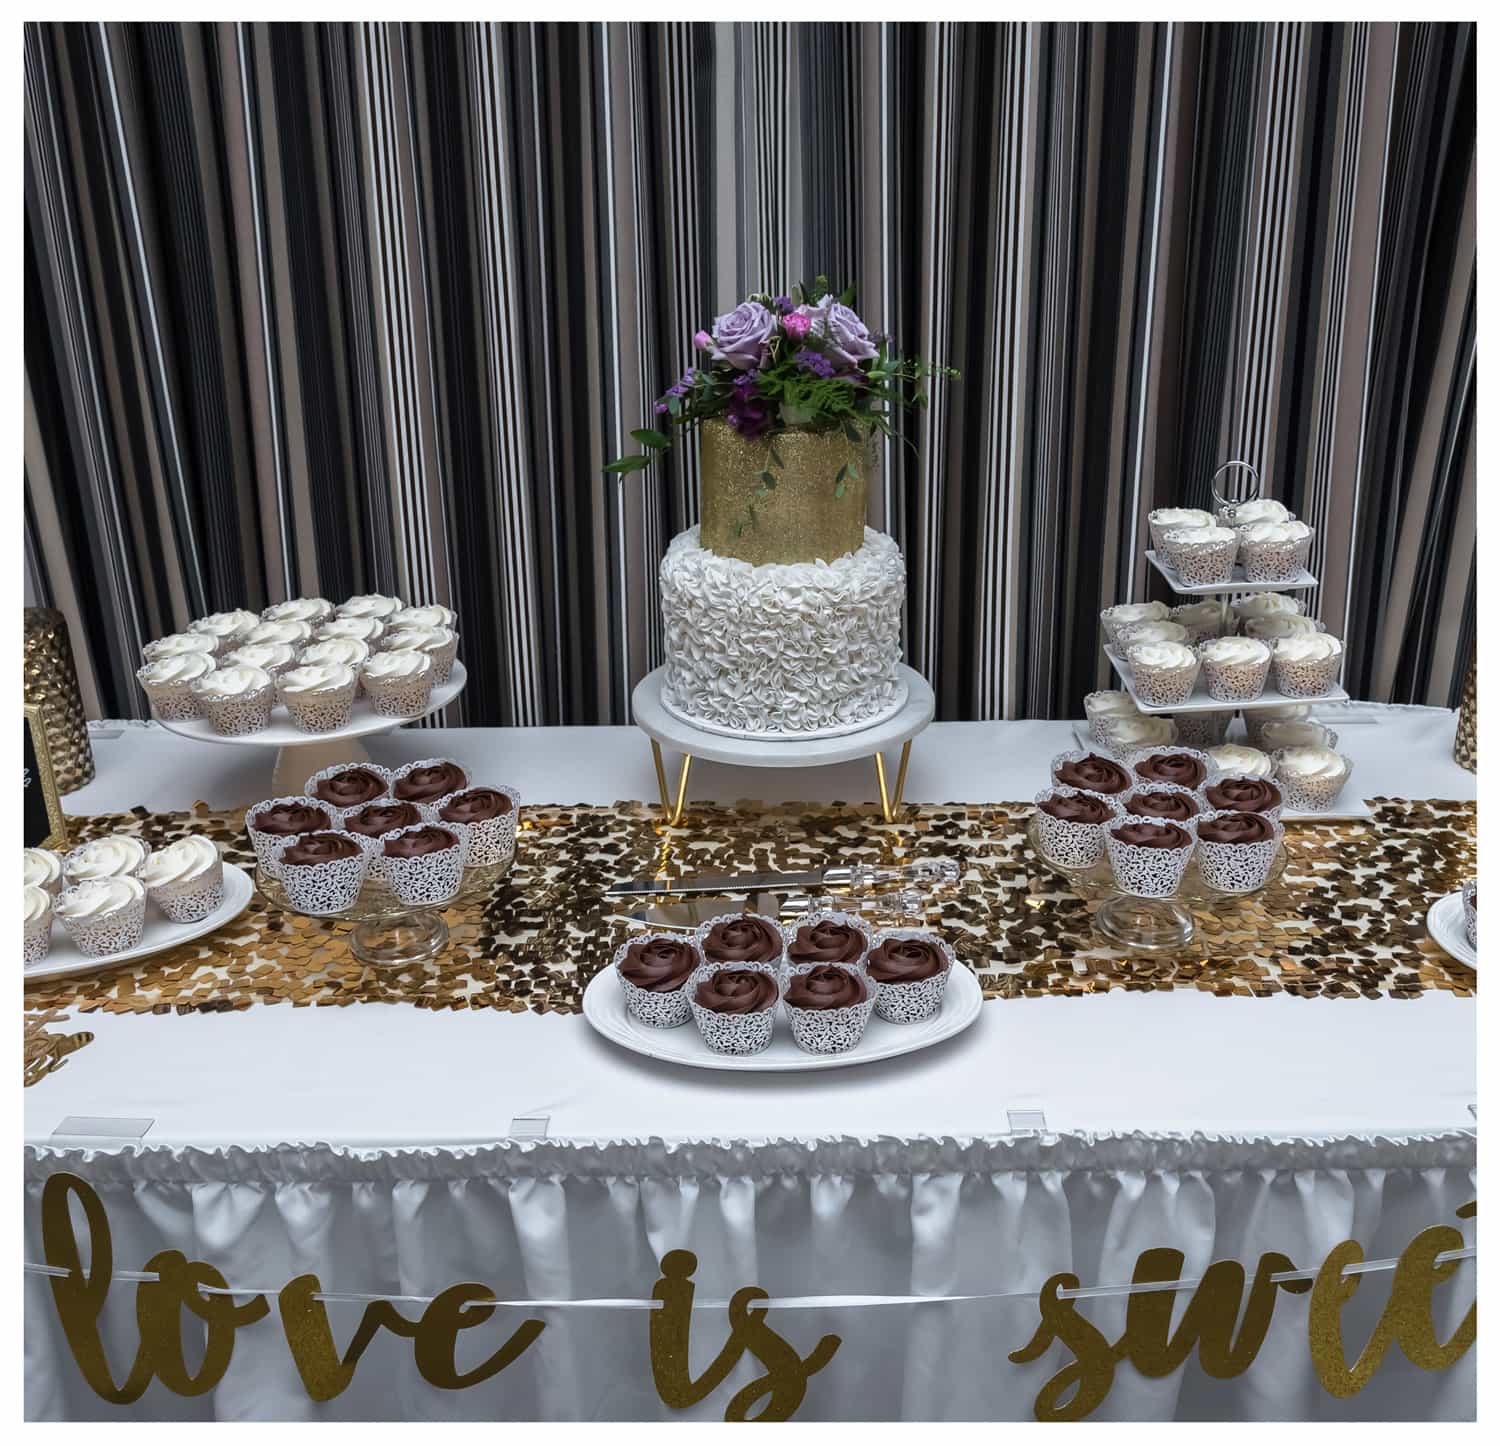 a two tier wedding cake with floral wedding cake topper surrounded by wedding cupcakes on three tier cupcake stands